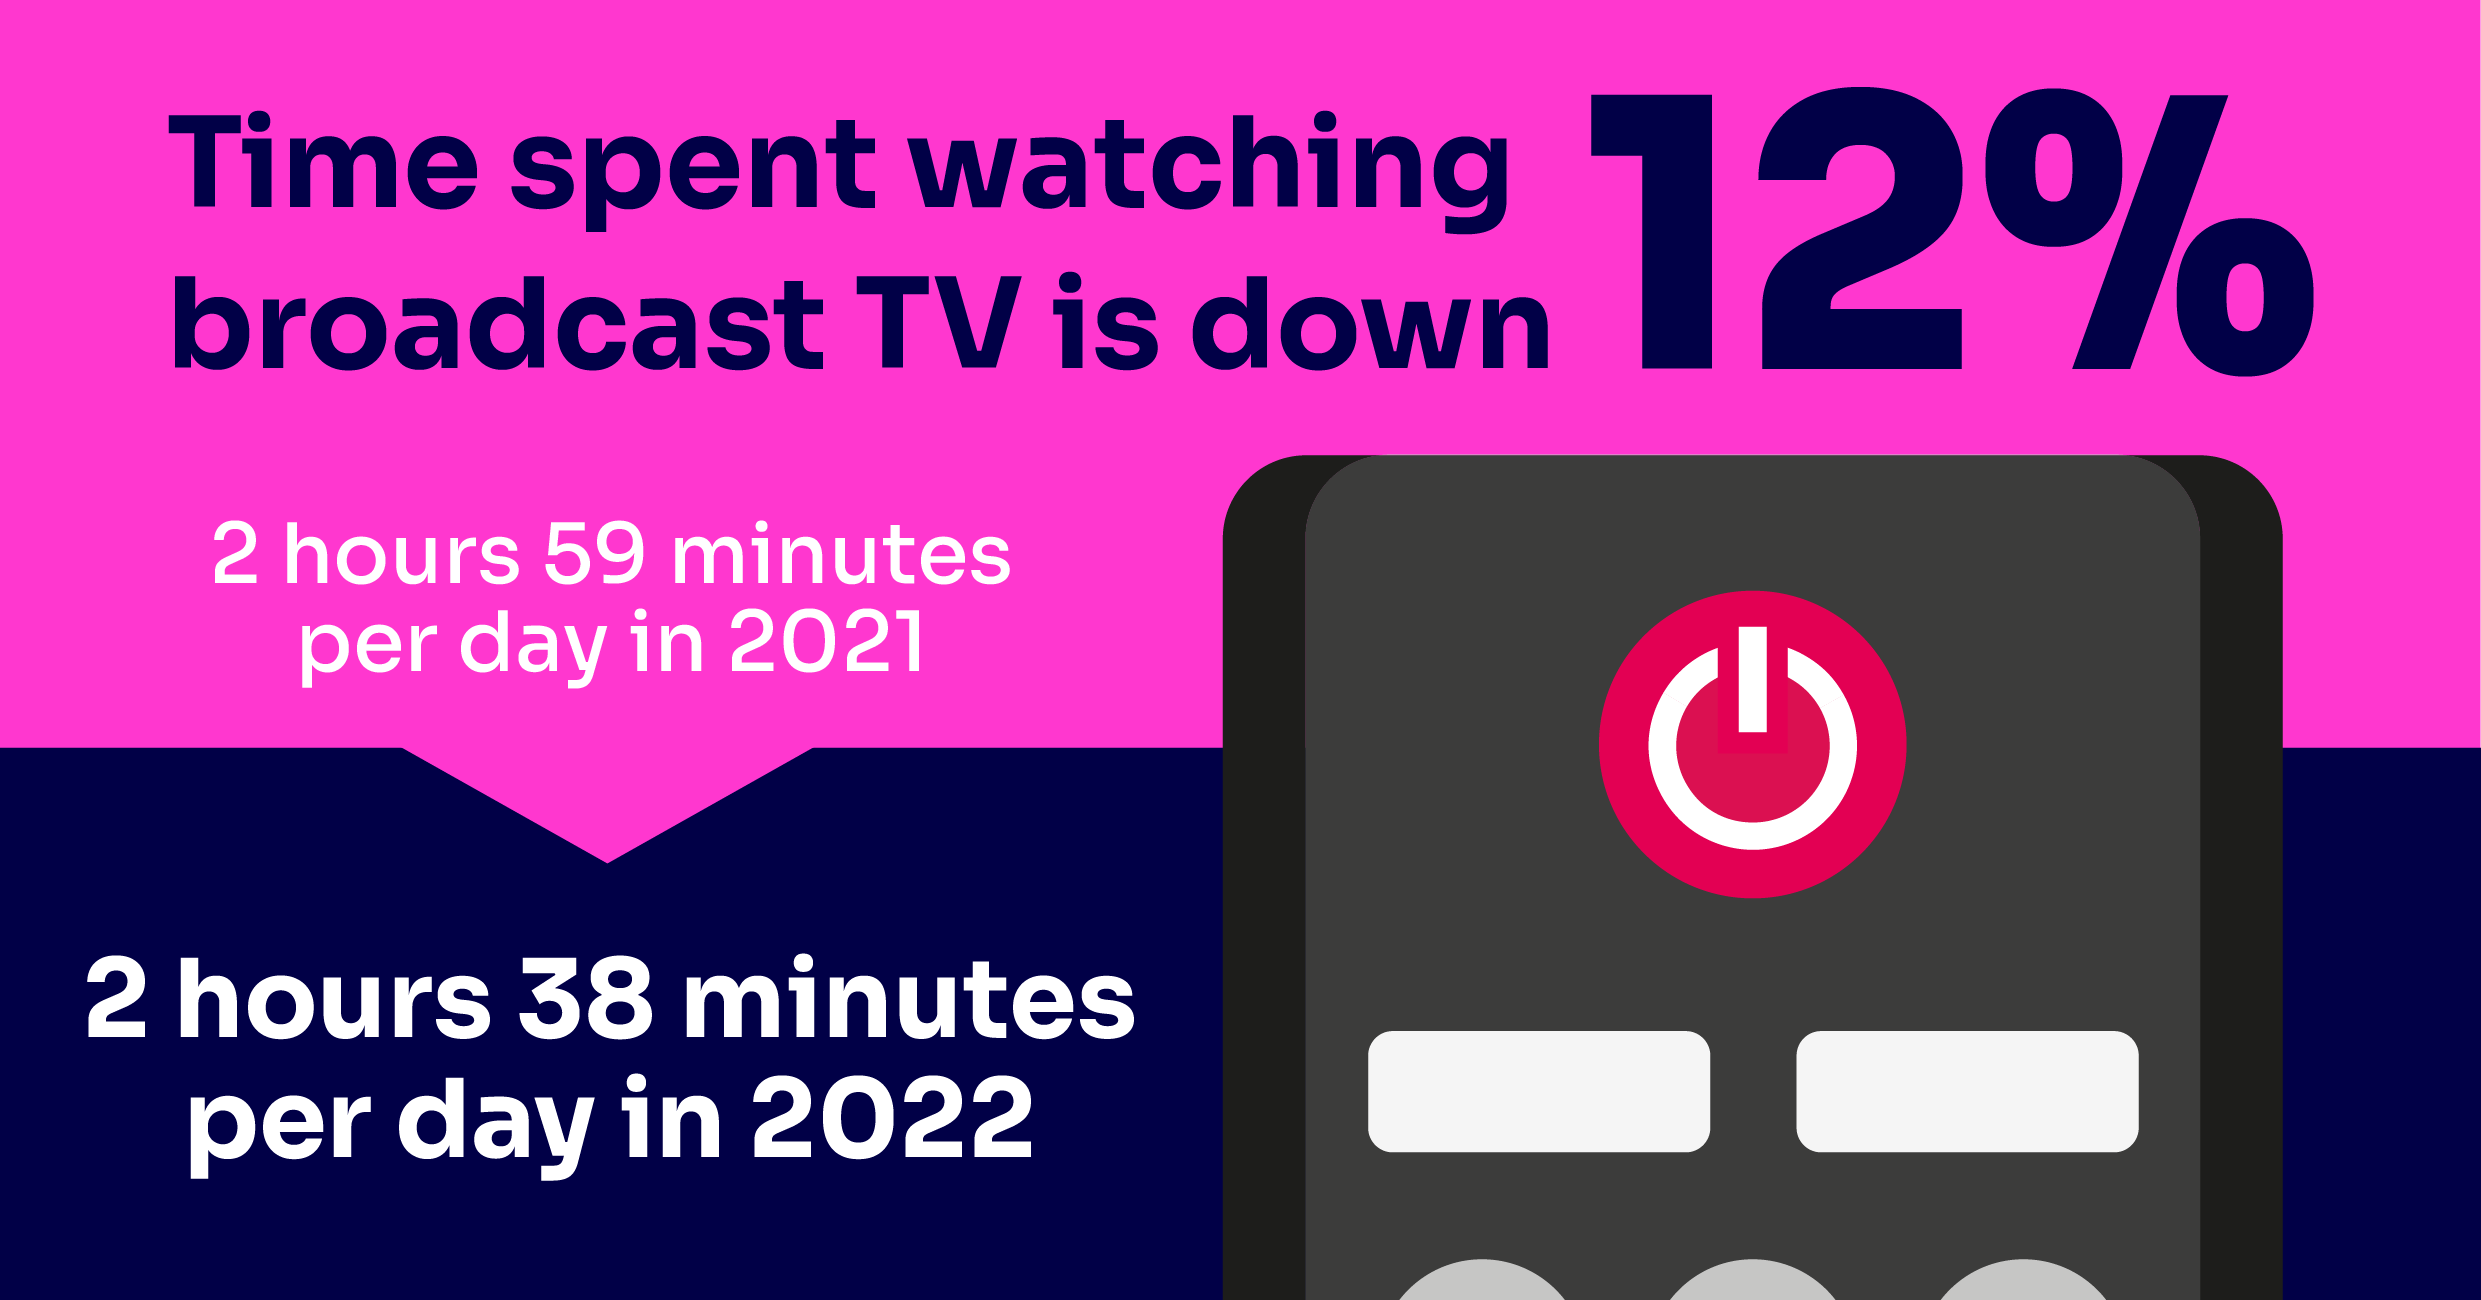 Time spent watching broadcast TV is down 12%